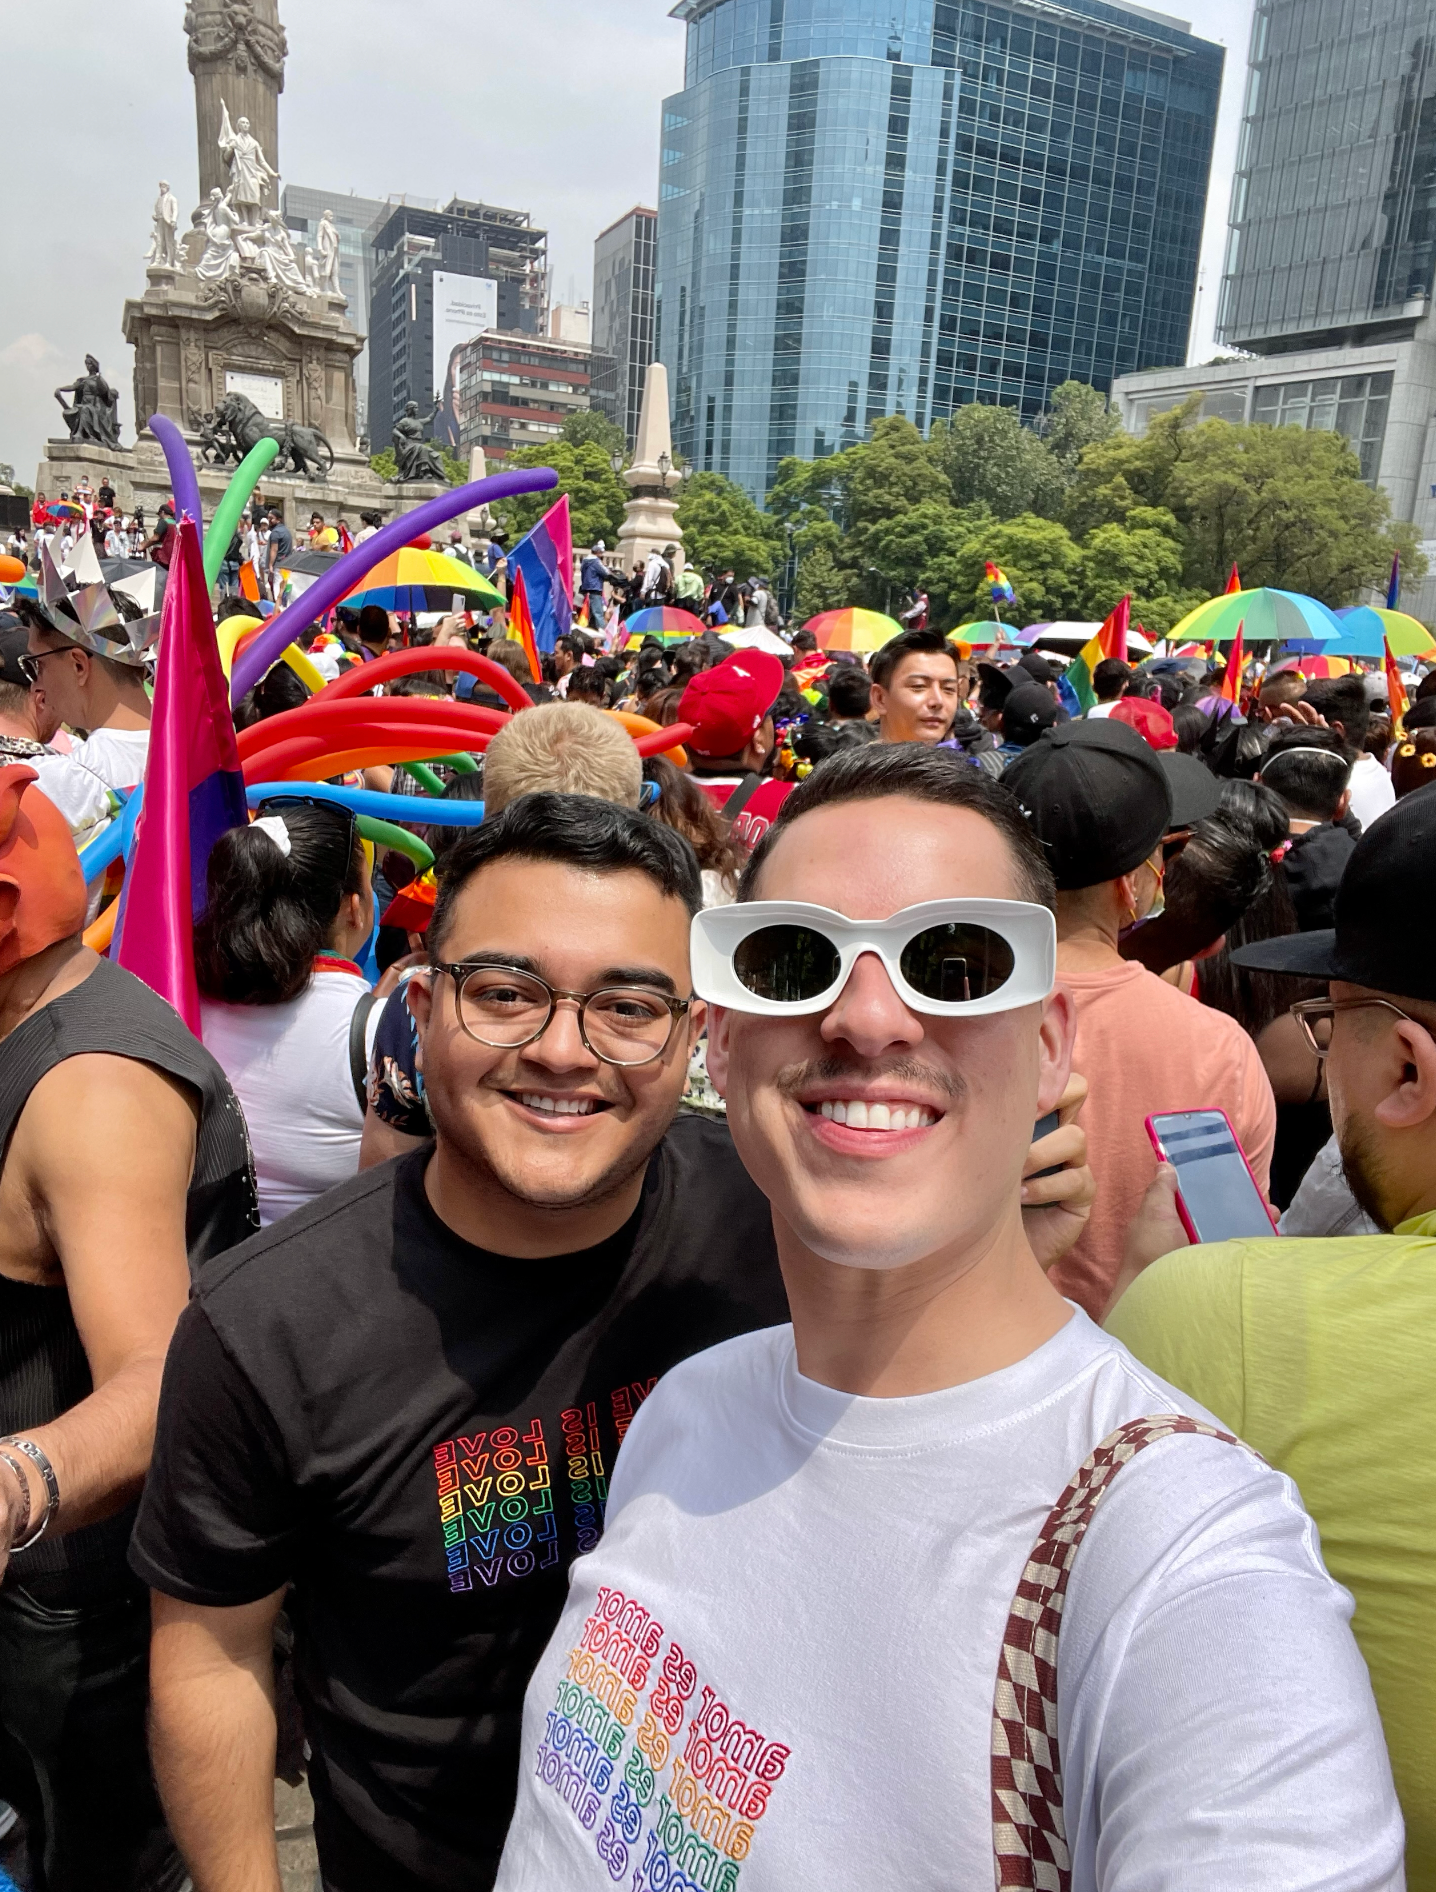 I am scared of going to my first Pride. What should I expect?